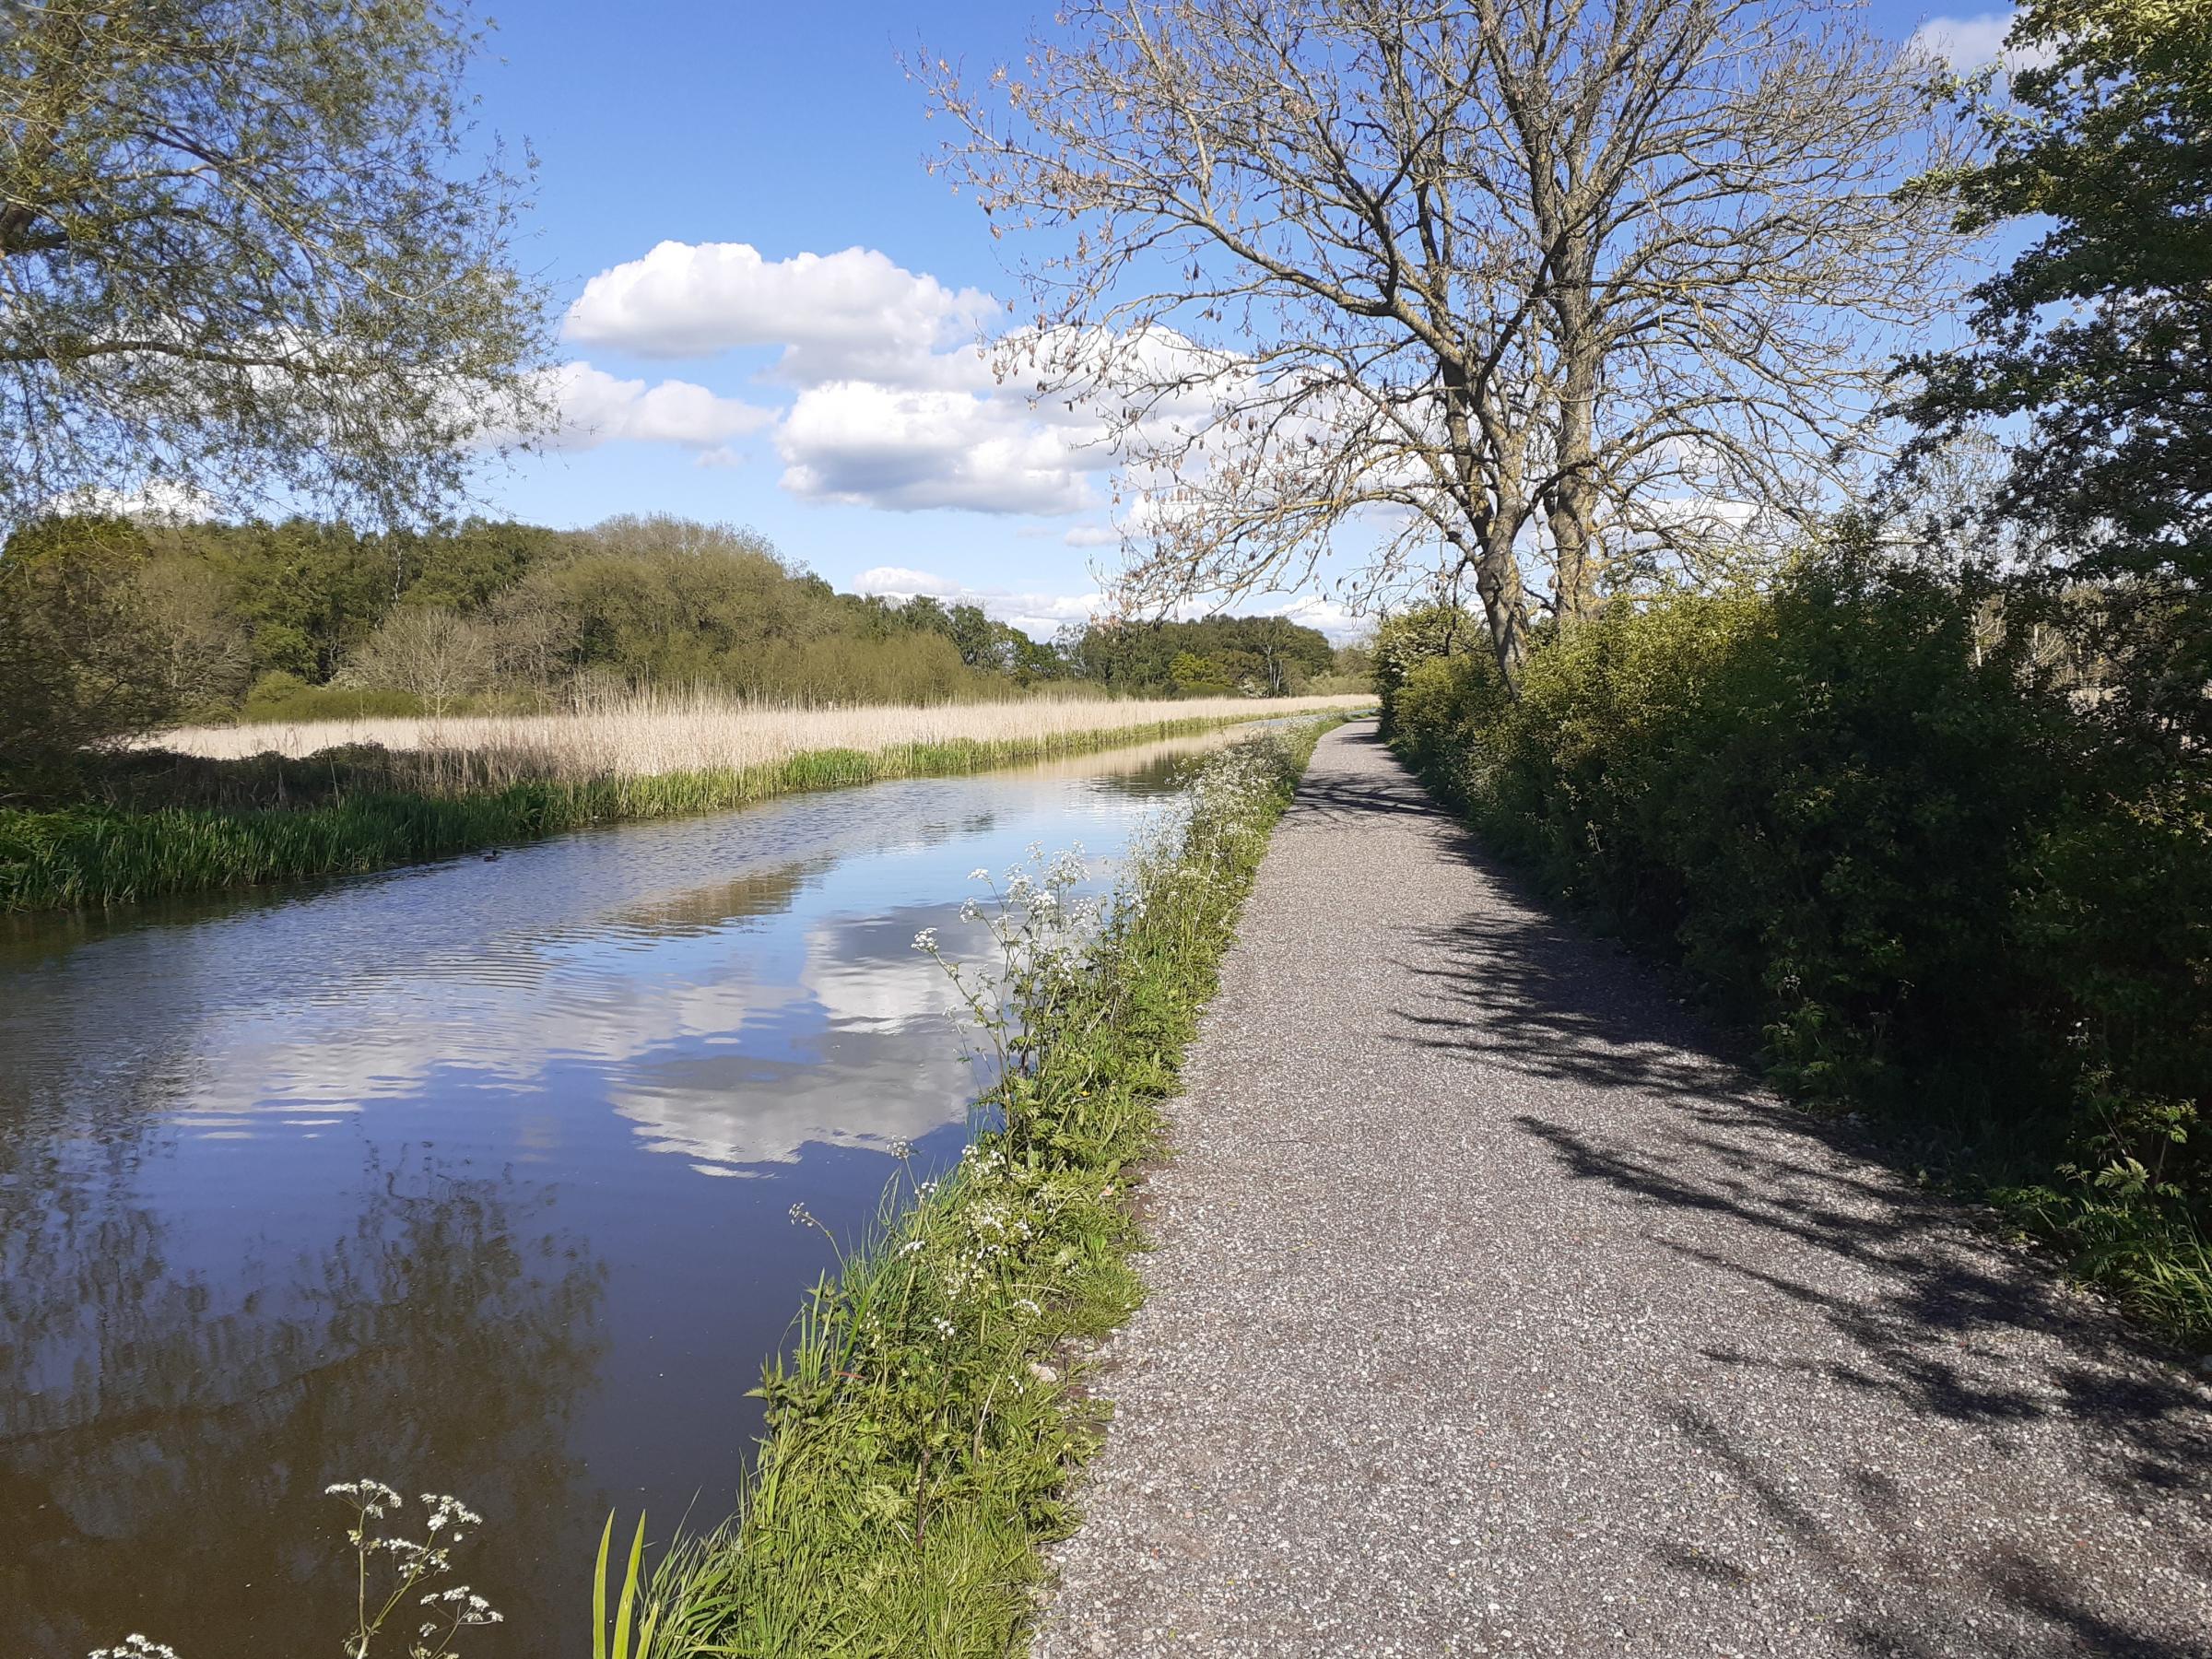 The Backford to the Countess canal towpath.